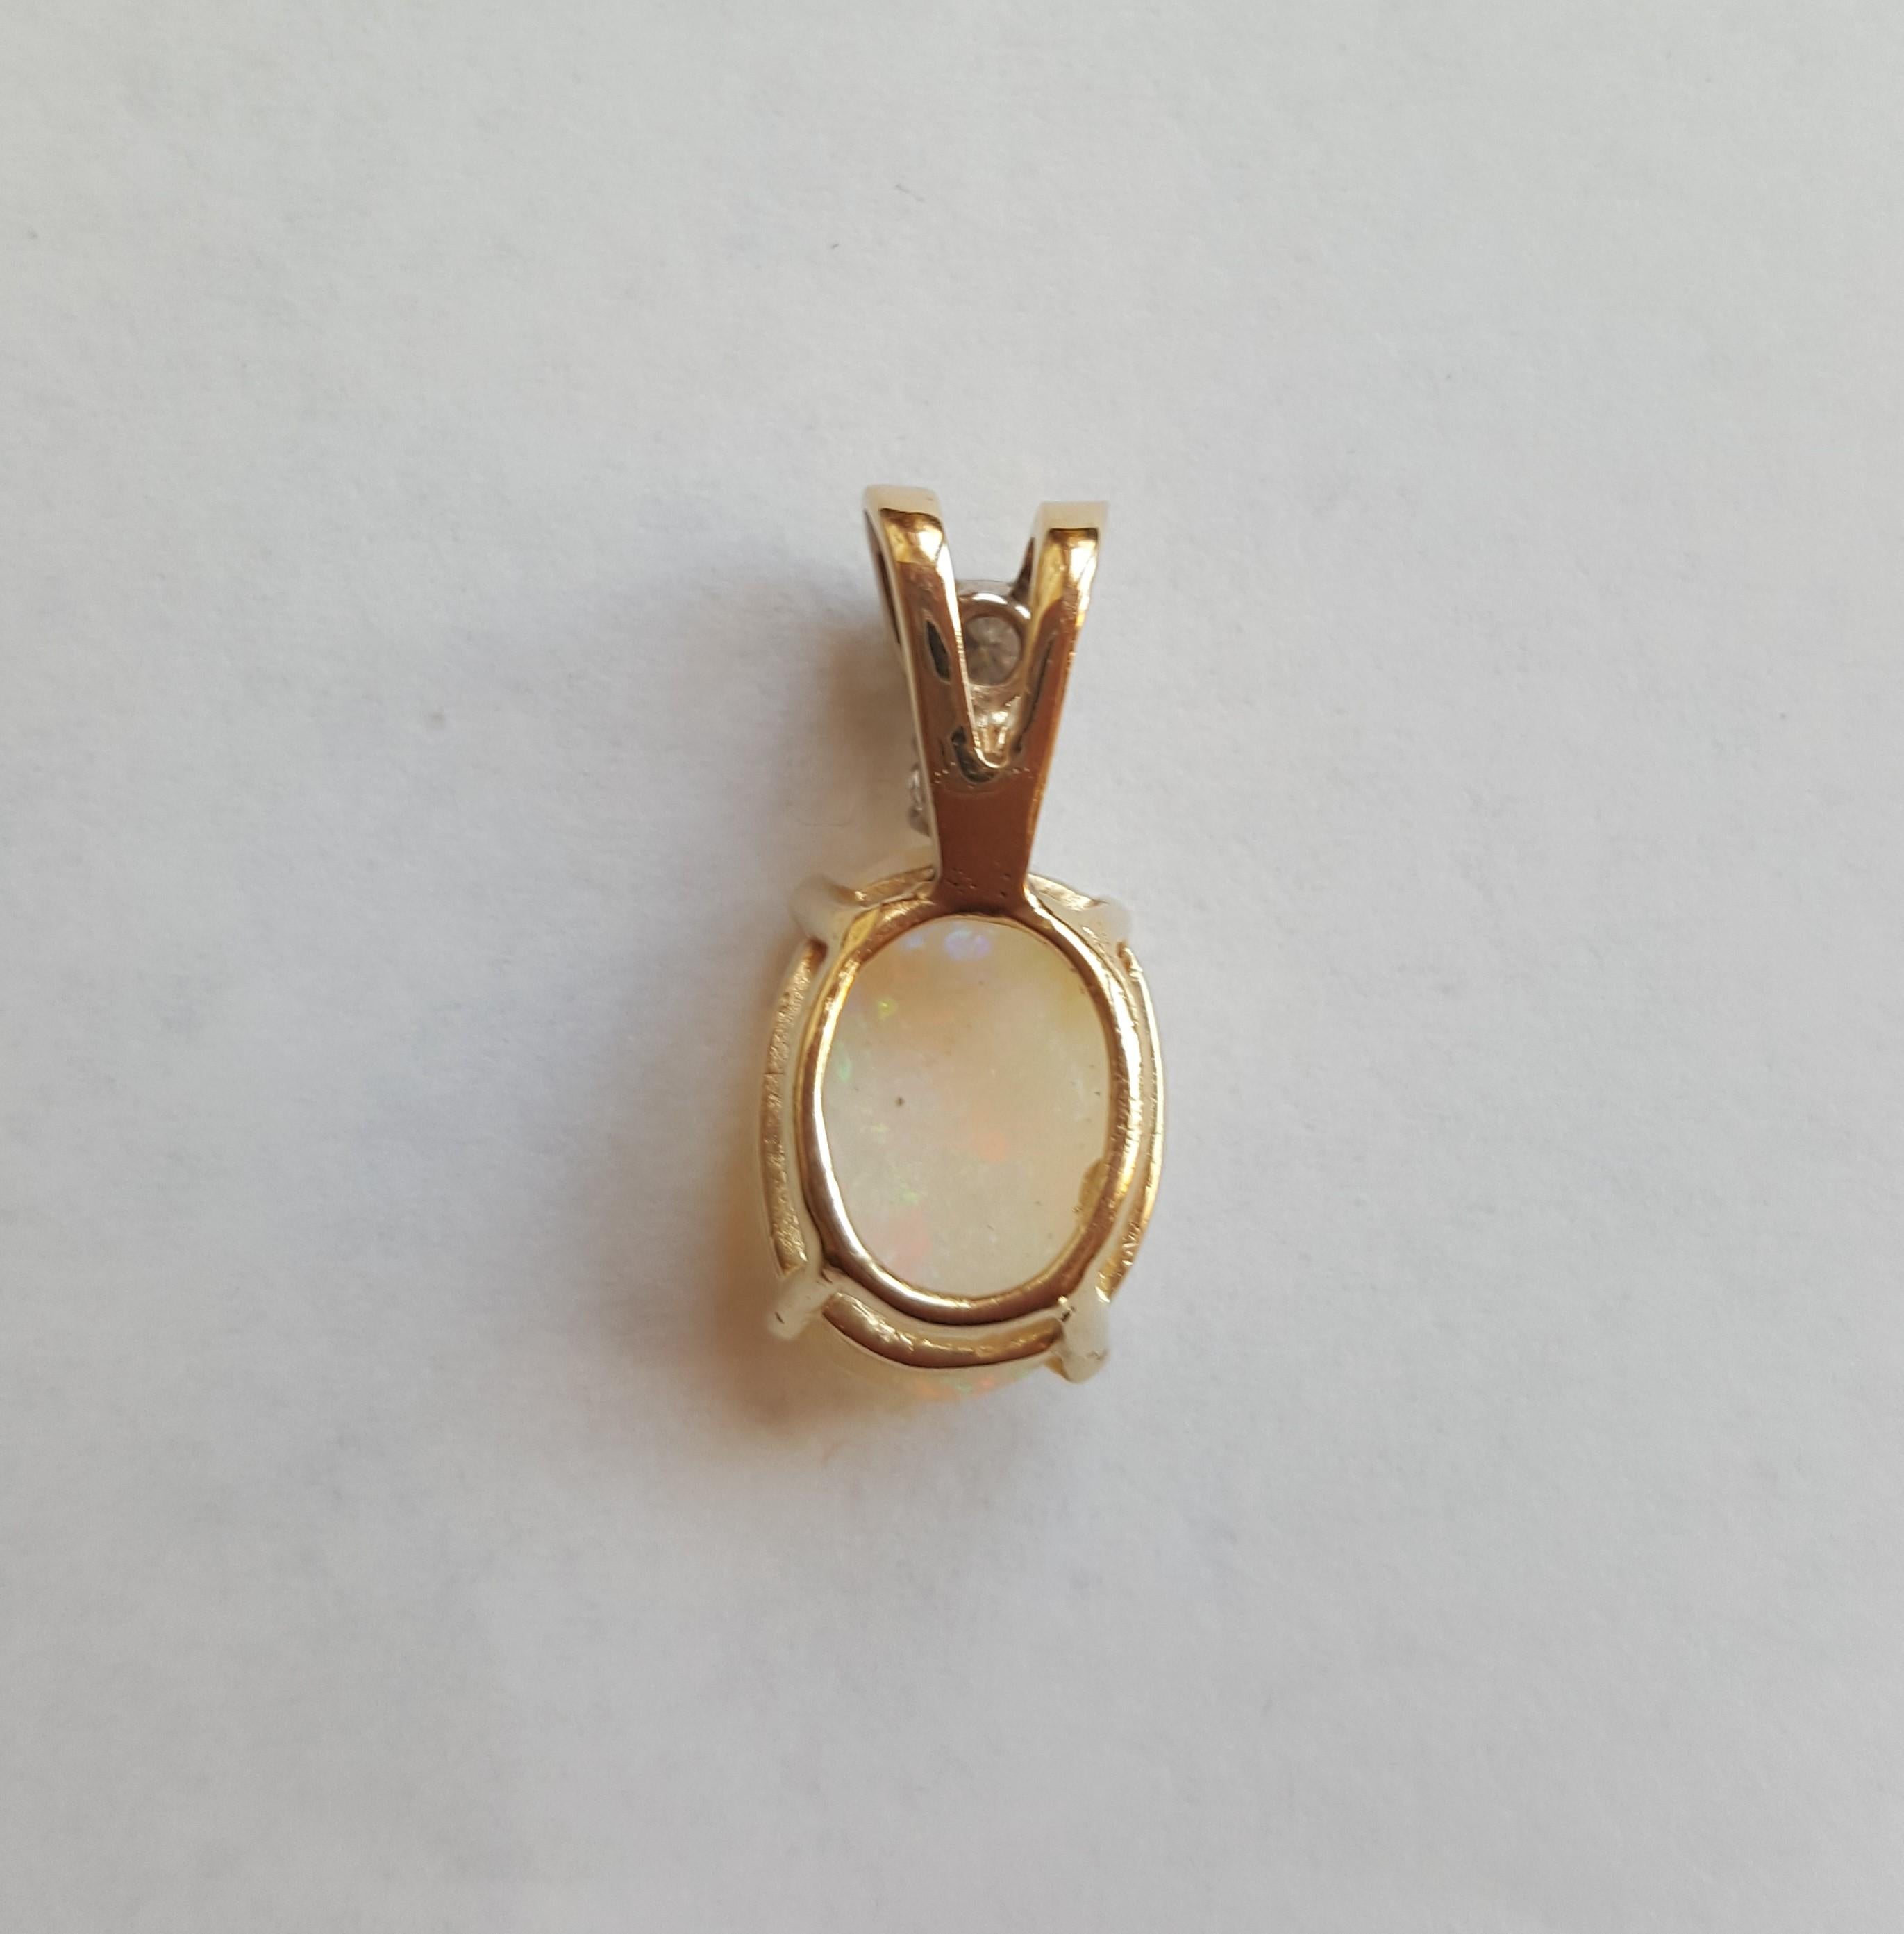 14kt Yellow Gold Oval Opal, Round Brilliant Diamonds Pendant, 12.6 mm X 8.9 X 3.3 mm Opal, 2 Diamonds Approx . 21cttw, 2 Grams Weight. The diamonds are 3.1mm  and 2.9 mm, H in Color and SI in Clarity.

With a reputation for timeless design, superior